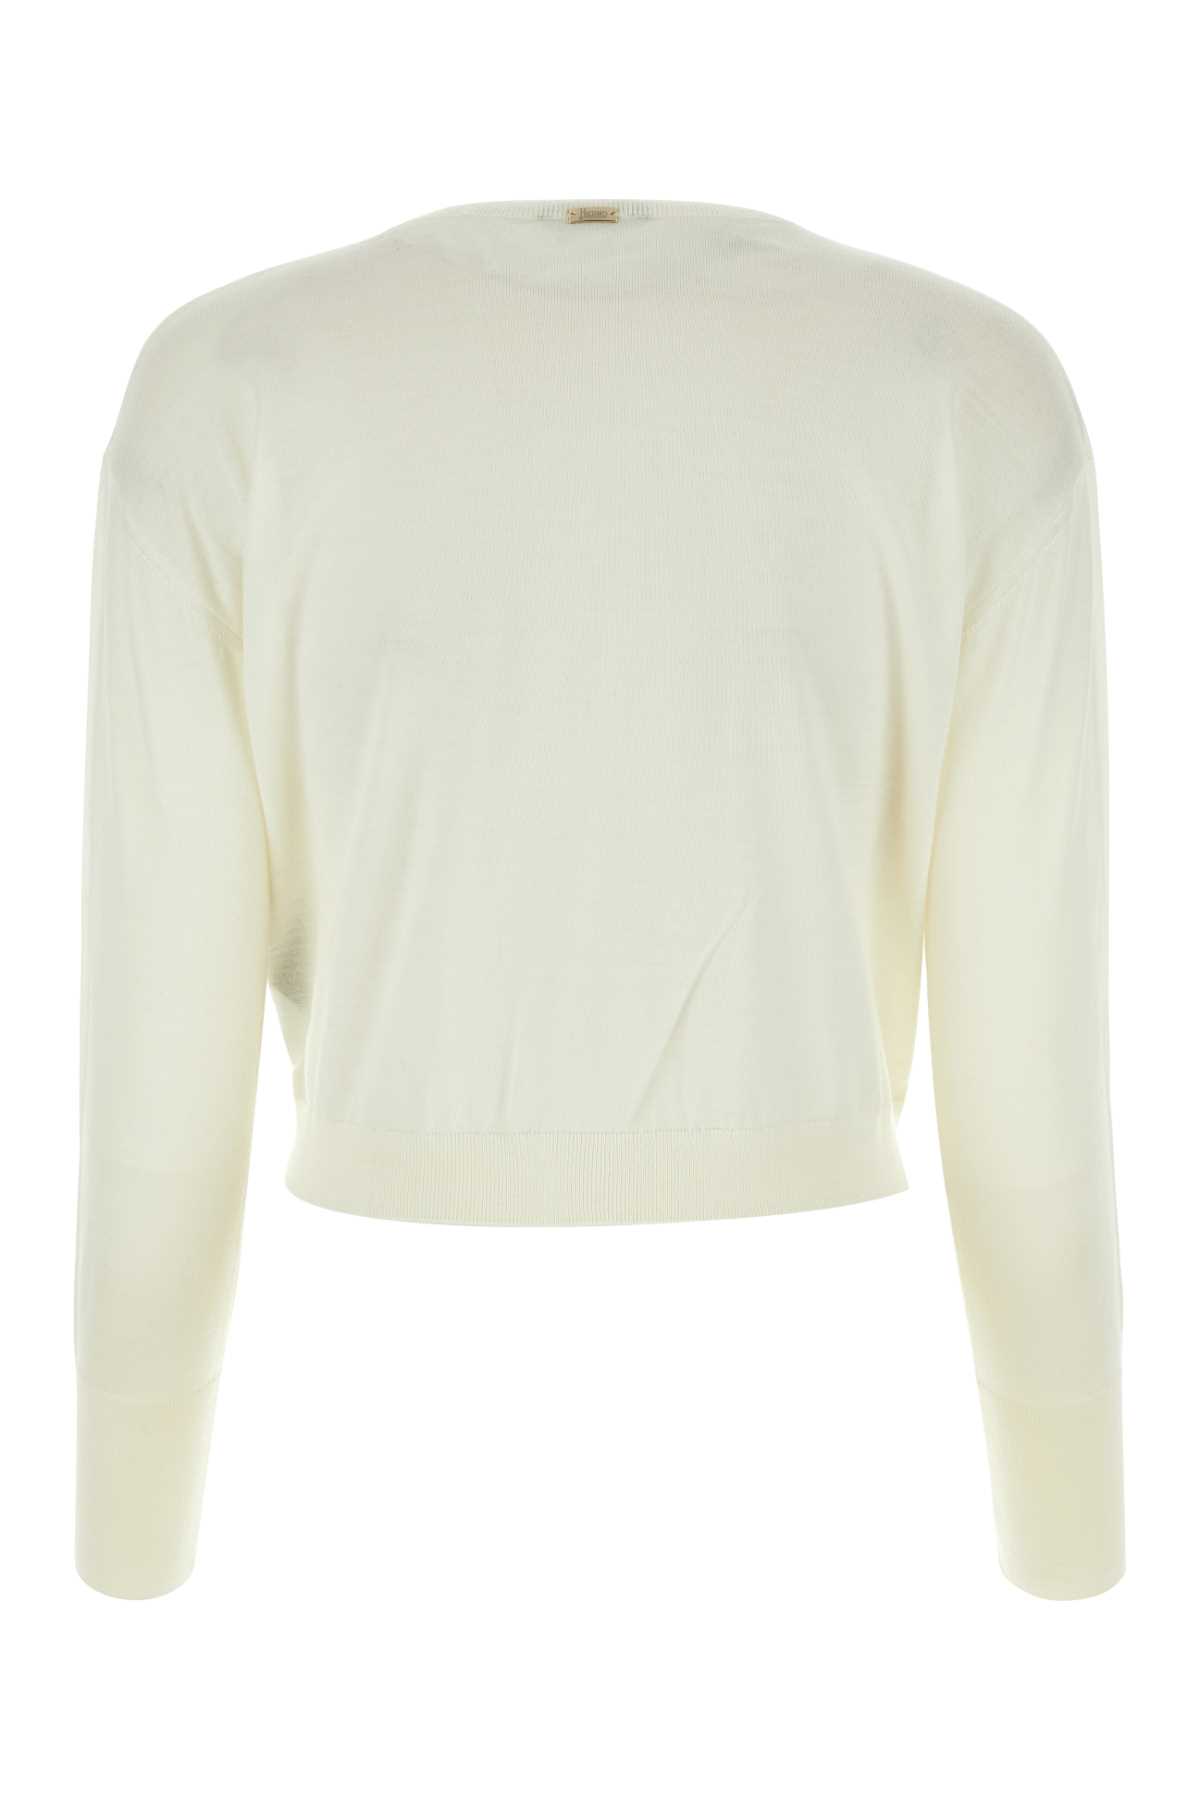 Herno Ivory Wool Sweater In Bianco